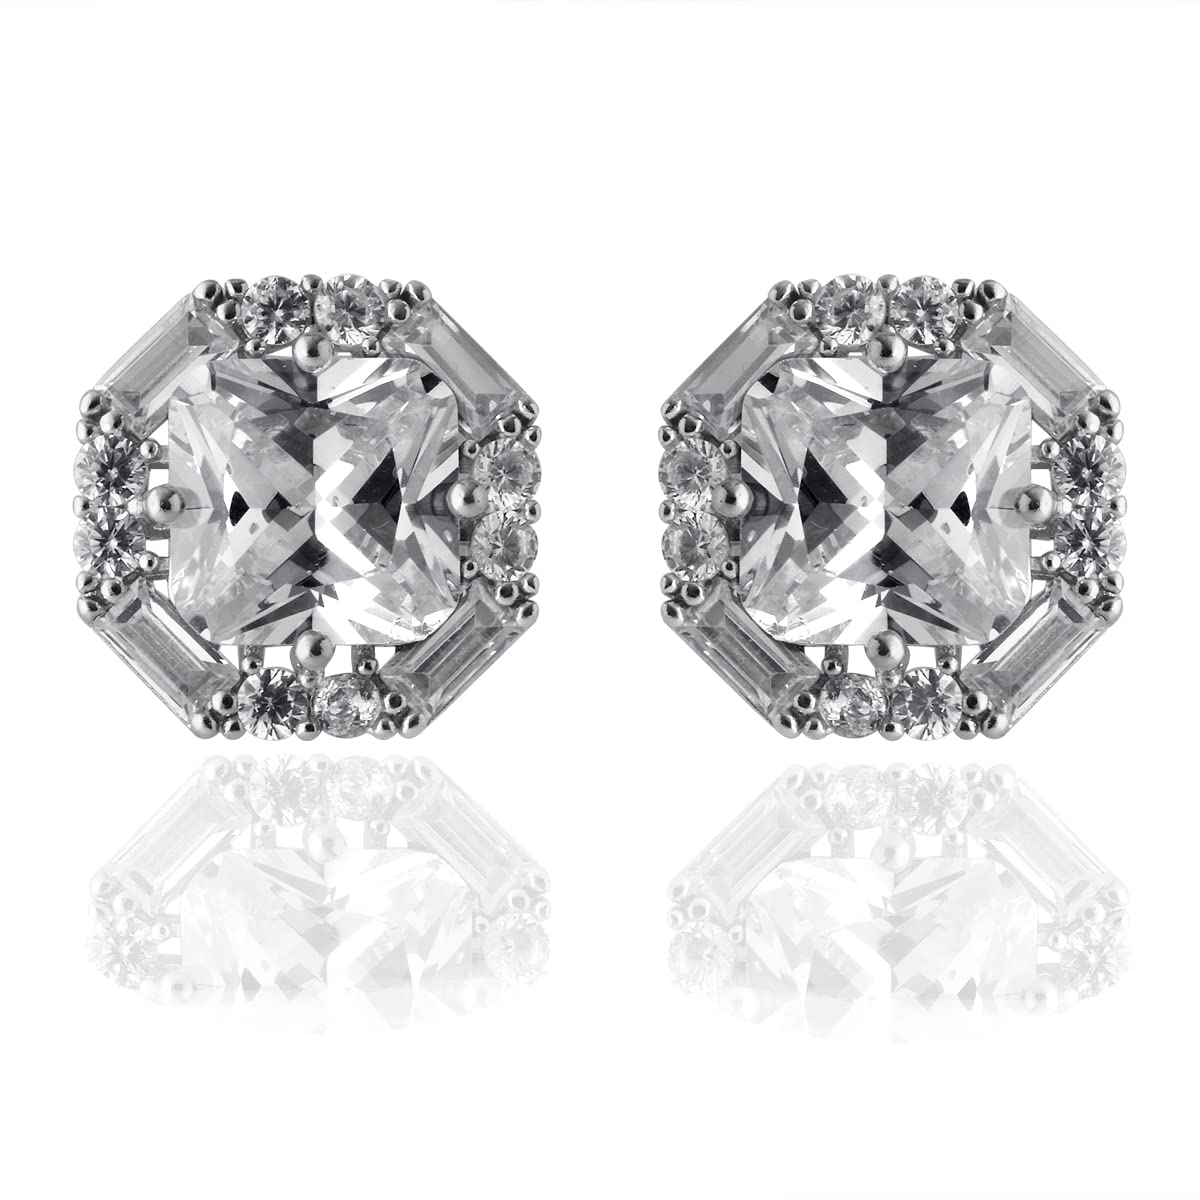 Buy Ratnavali Jewels Rose Gold Plated CZ AD Studded White Marquise Big  Round Stud Tops Earrings online